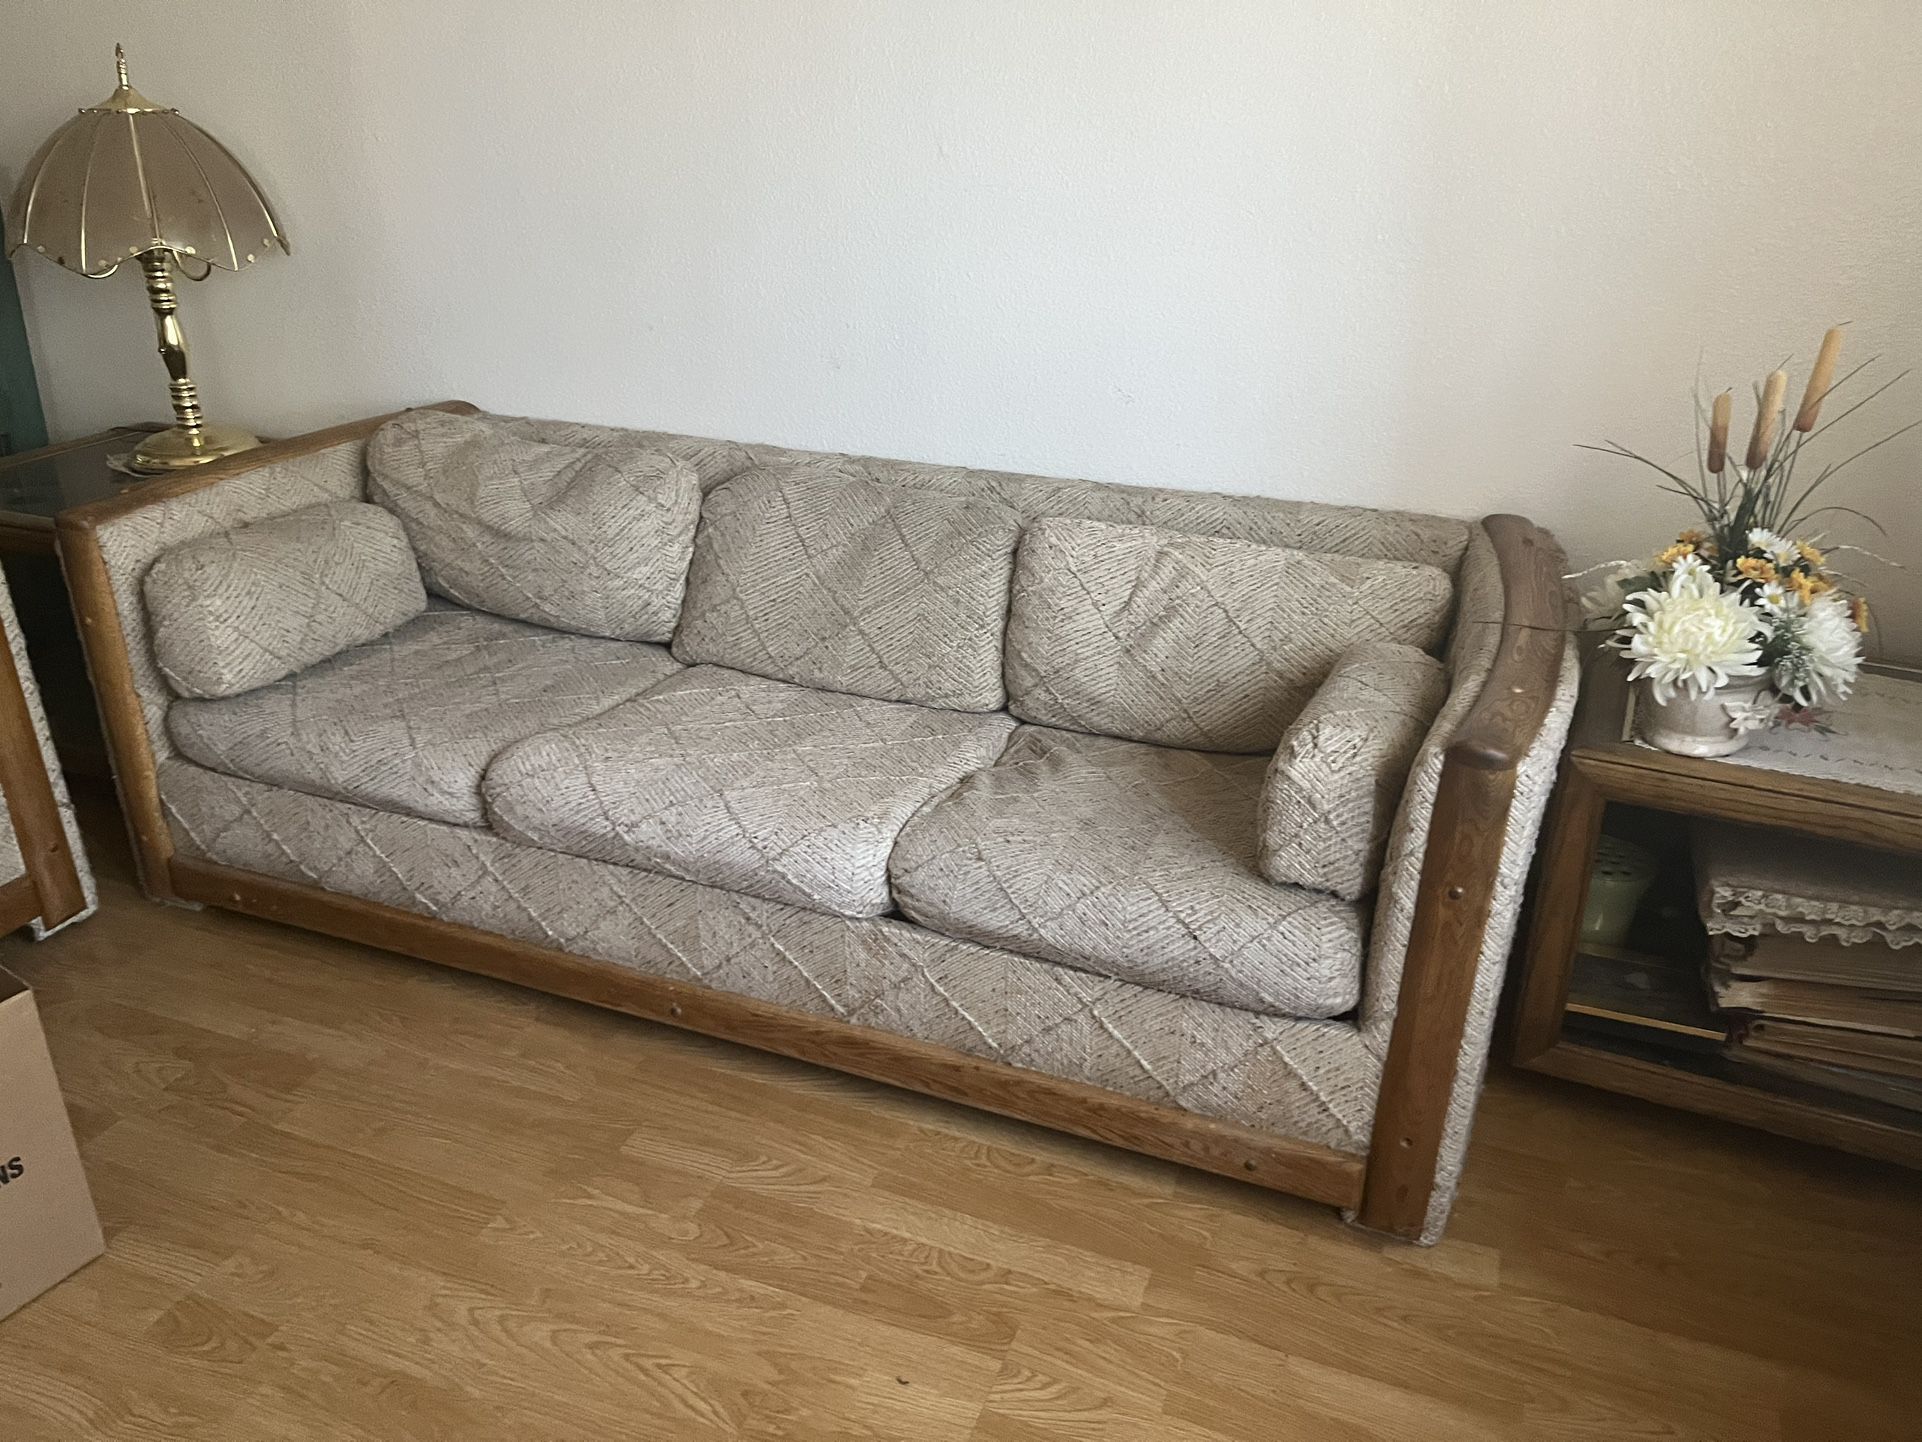 FREE Couches And Glass Tables